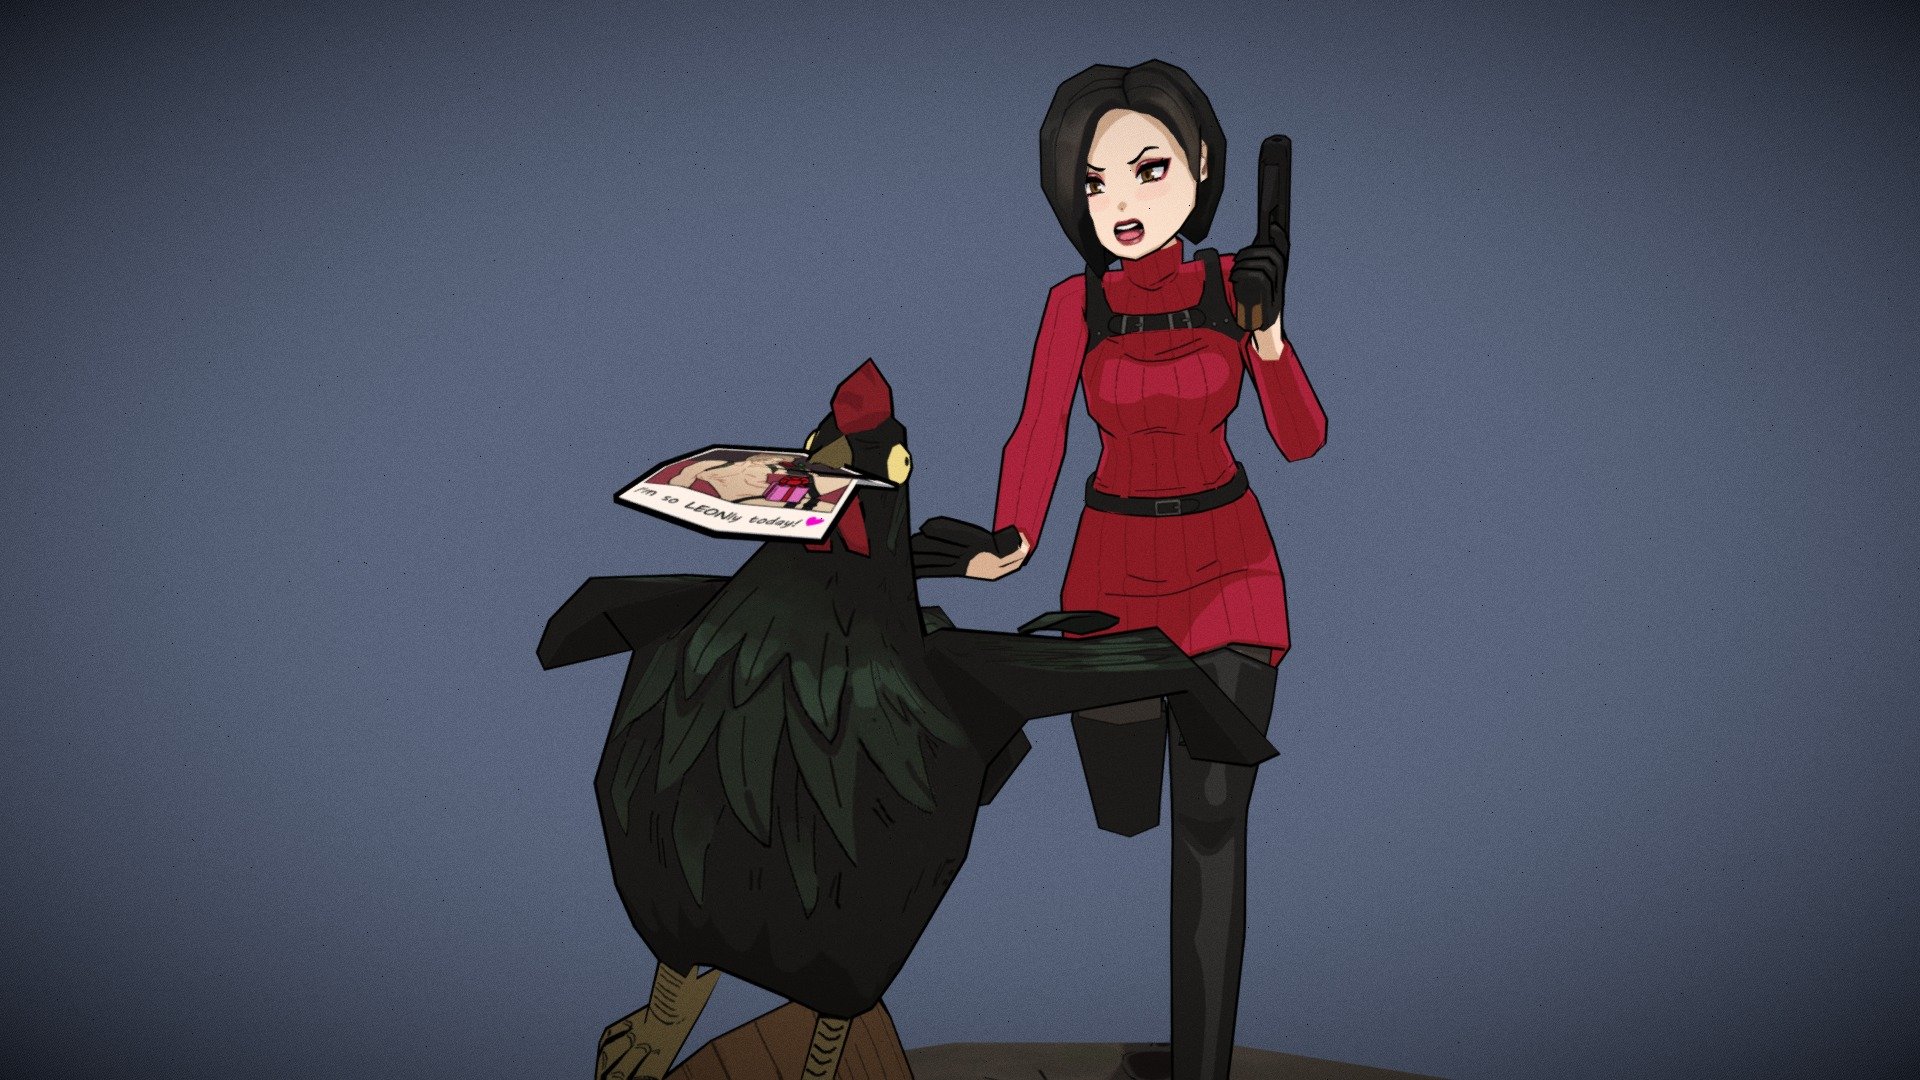 My good friend advised me to do a scene with Ada and the big black rooster. She said it would be popular. Well, I did it ¯_(ツ)_/¯ - Ada Wong and black cock - 3D model by NativeLuckStudio 3d model